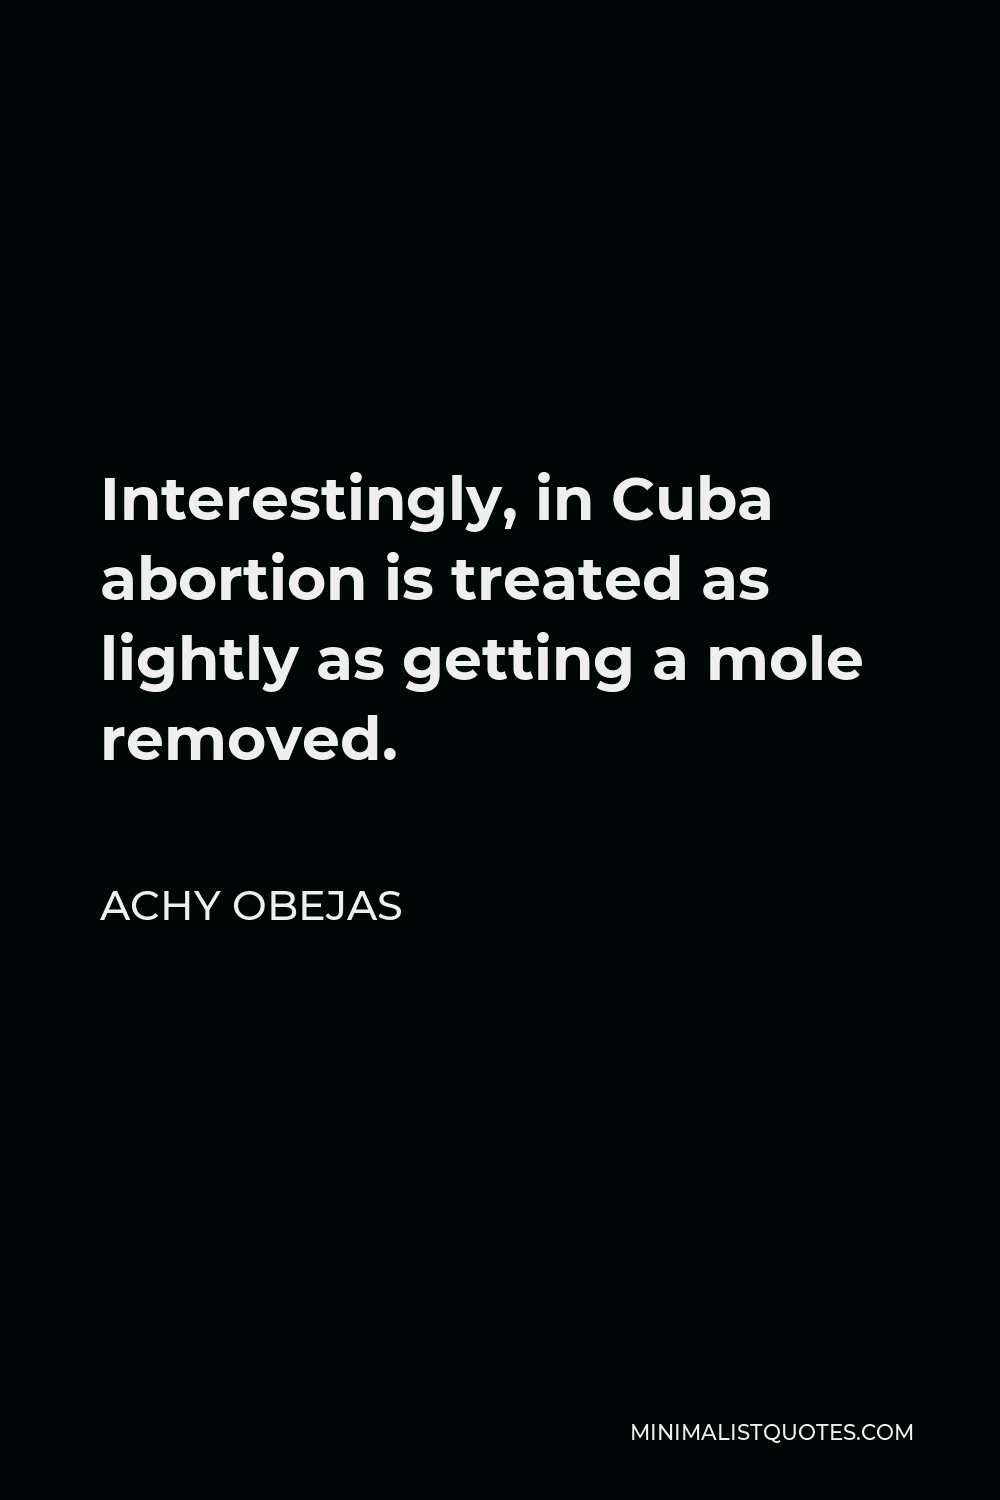 Achy Obejas Quote - Interestingly, in Cuba abortion is treated as lightly as getting a mole removed.